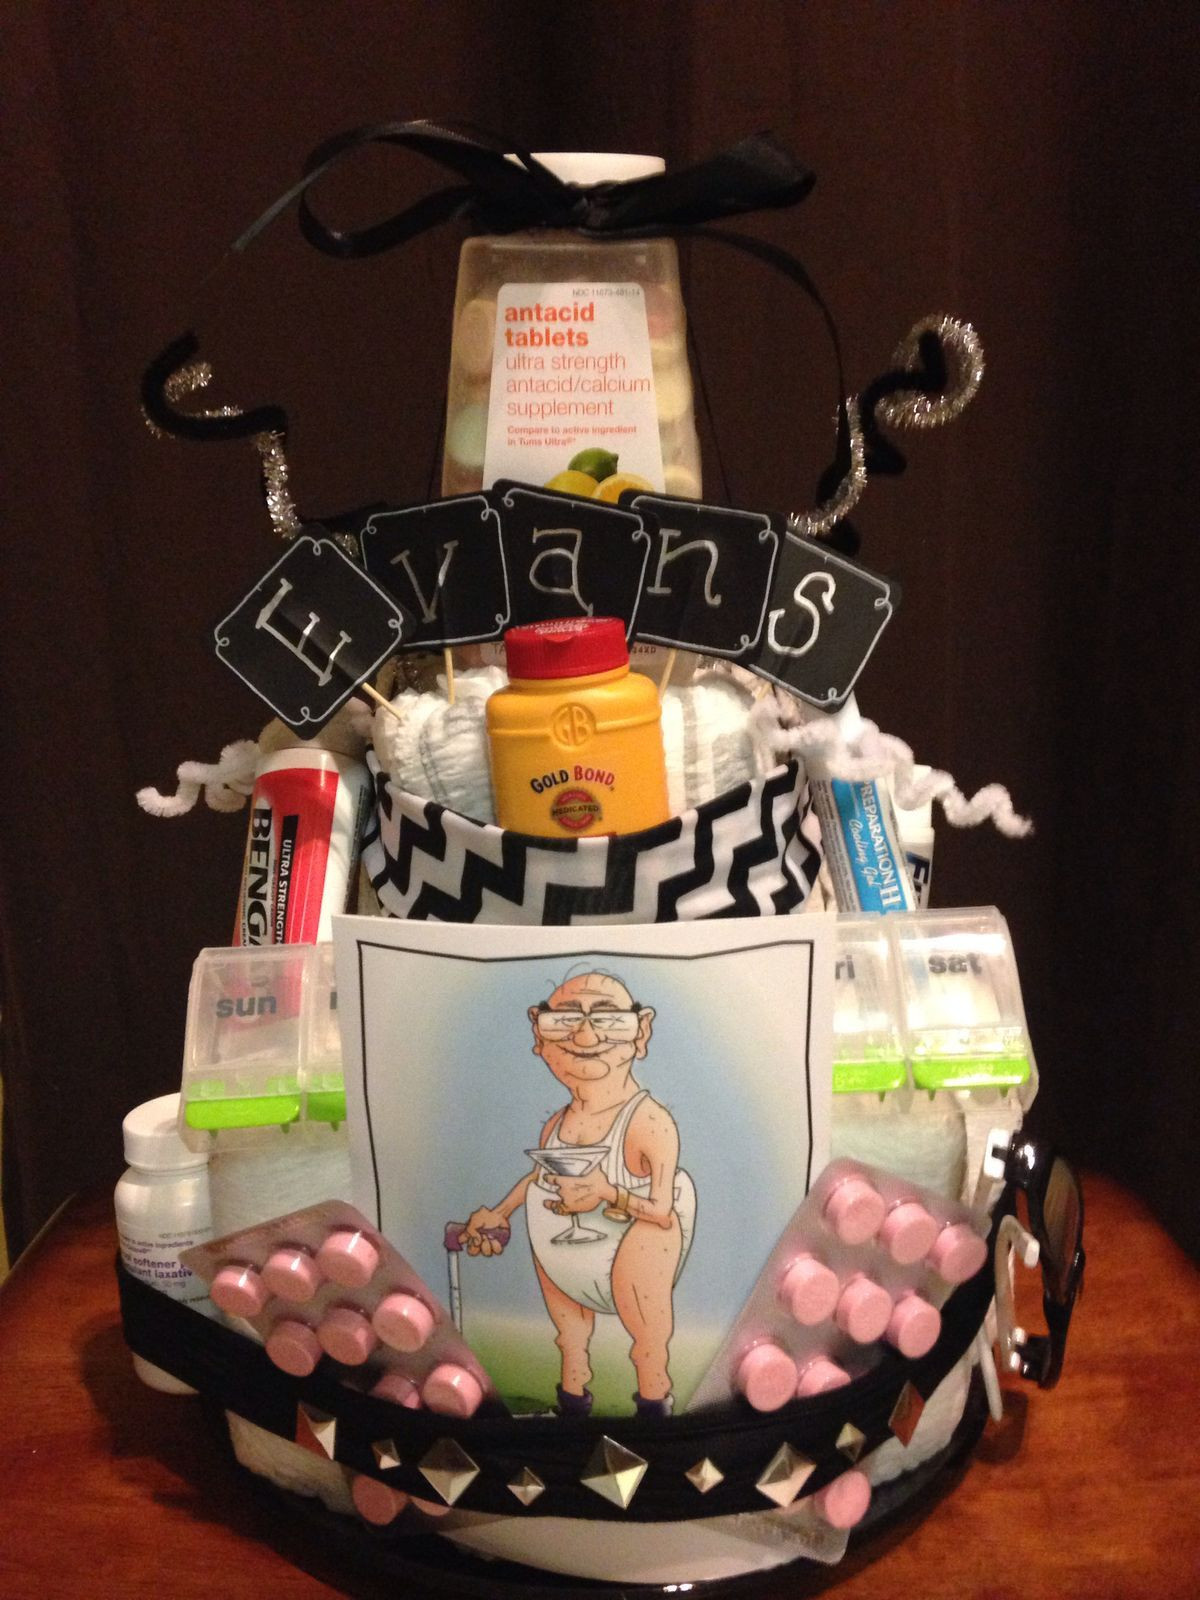 60th Birthday Gag Gifts
 Pin by Linda Morikawa on Over the Hill ideas